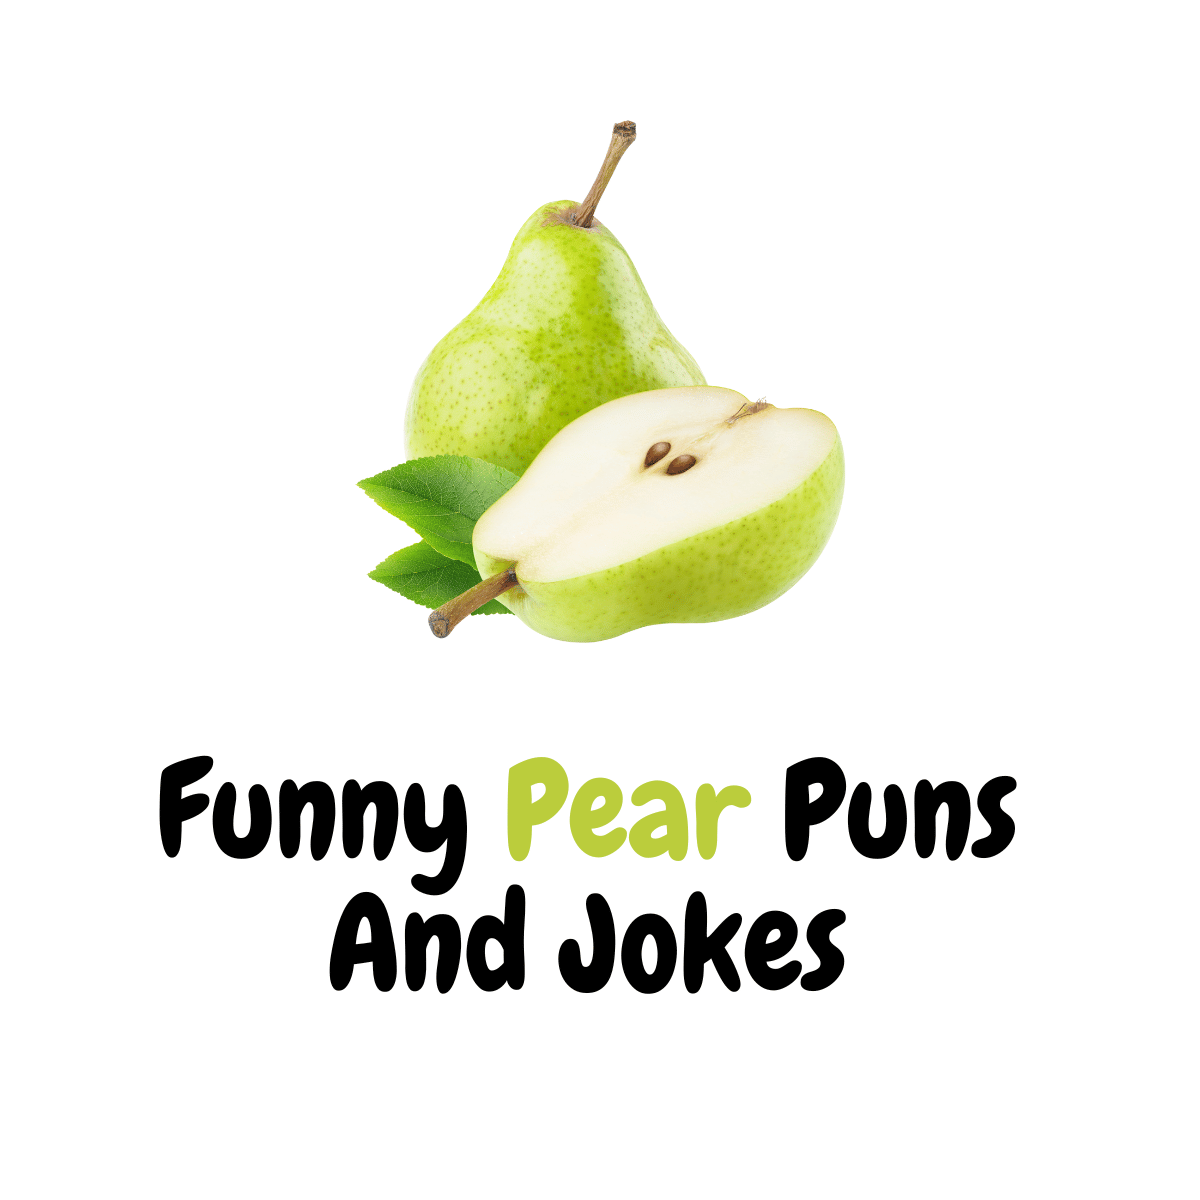 Funny Pear Puns And Jokes